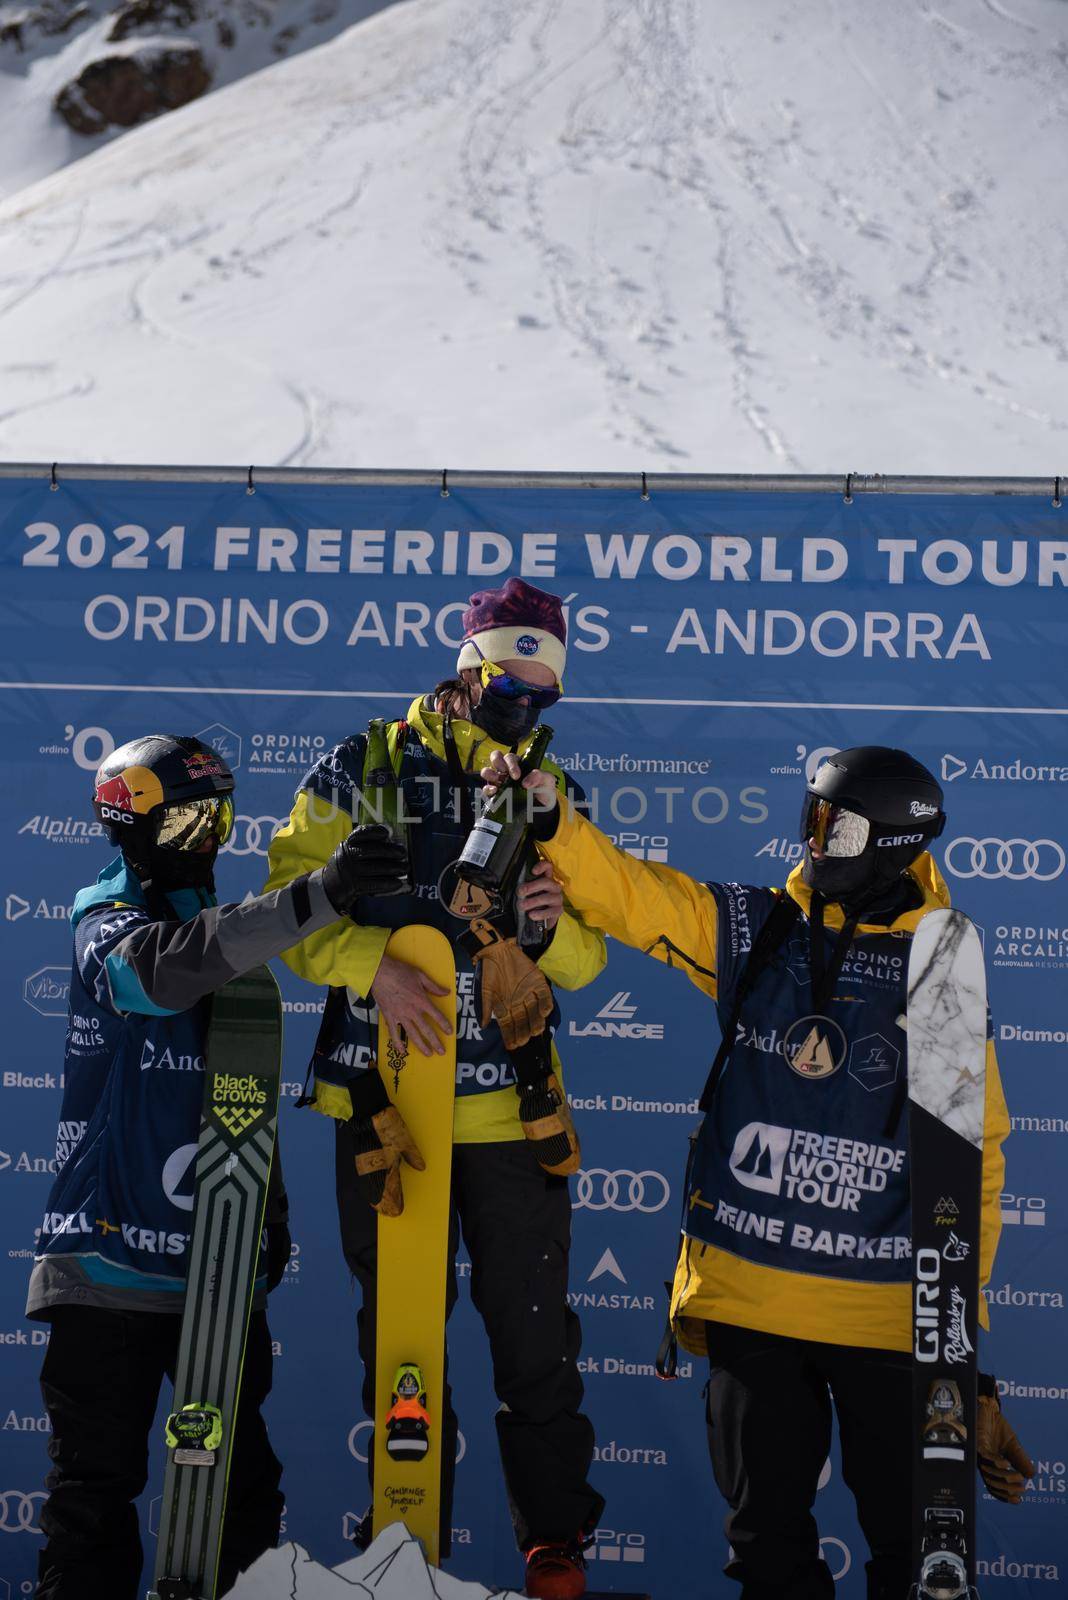 Ordino Arcalis, Andorra: 2021 February 24: Andrew Pollard in action at the Freeride World Tour 2021 Step 2 at Ordino Alcalis in Andorra in the winter of 2021.